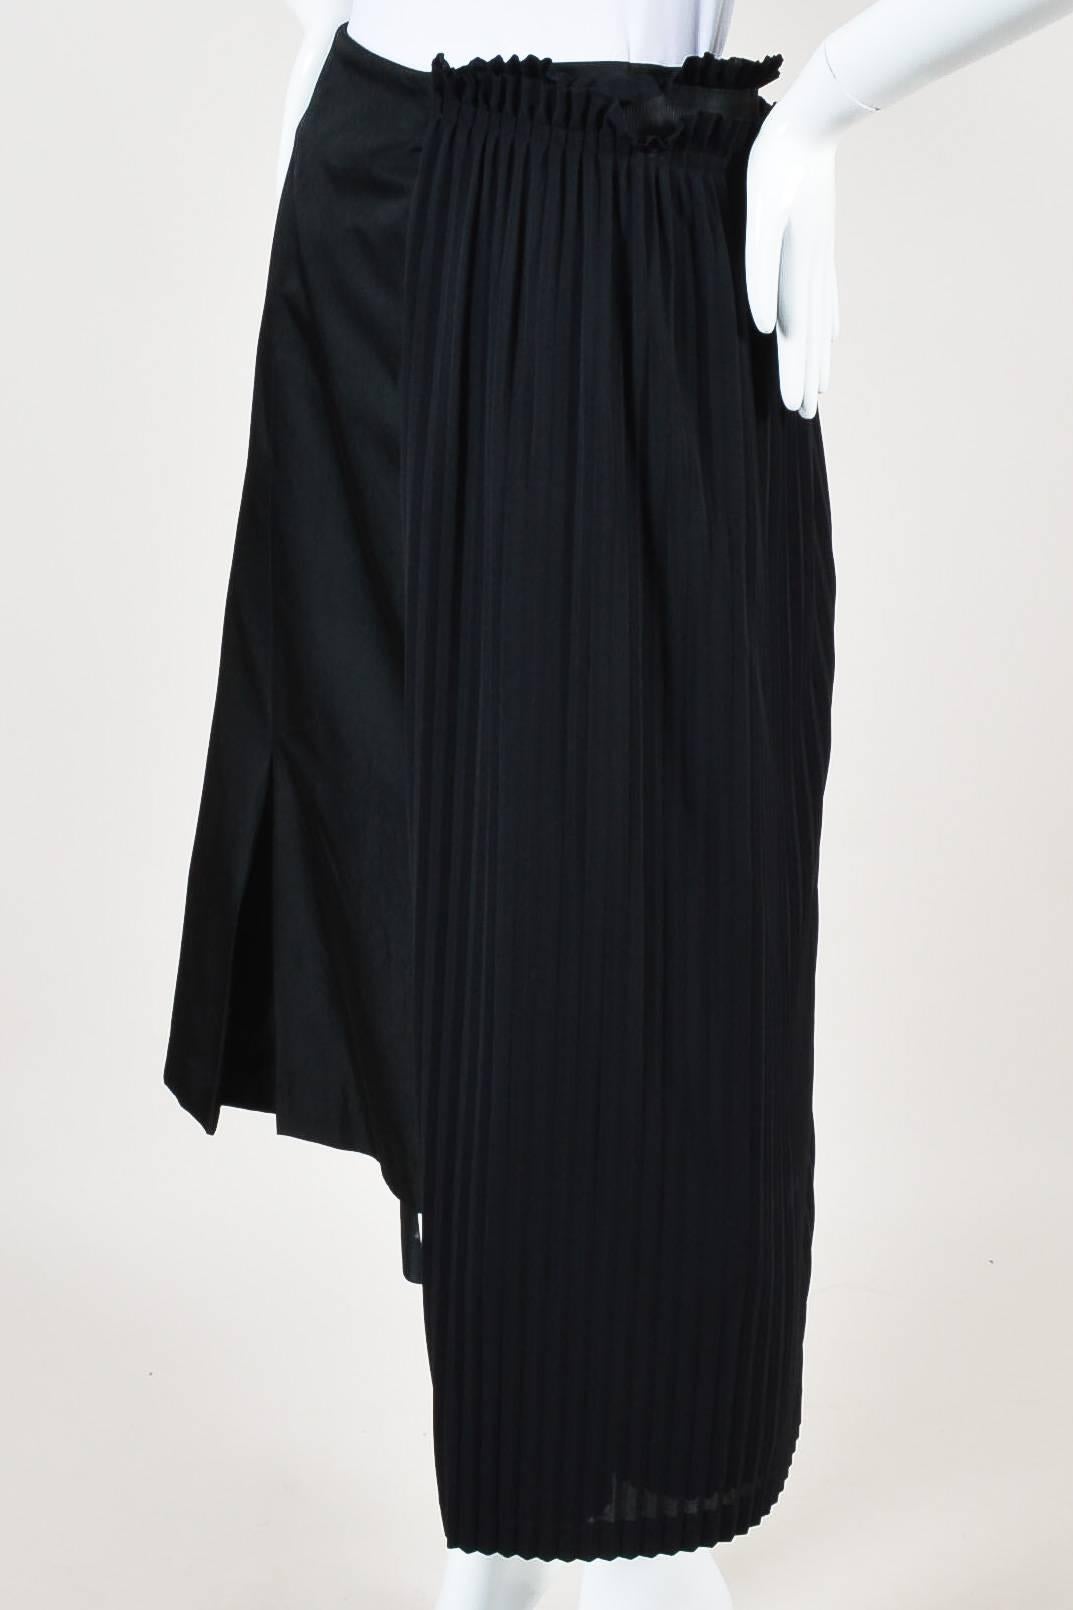 Avant-garde skirt features an attached pleated panel and extra skirt layer at the side with asymmetrical waistline and hem. Two zip and two hook-and-eye closures.